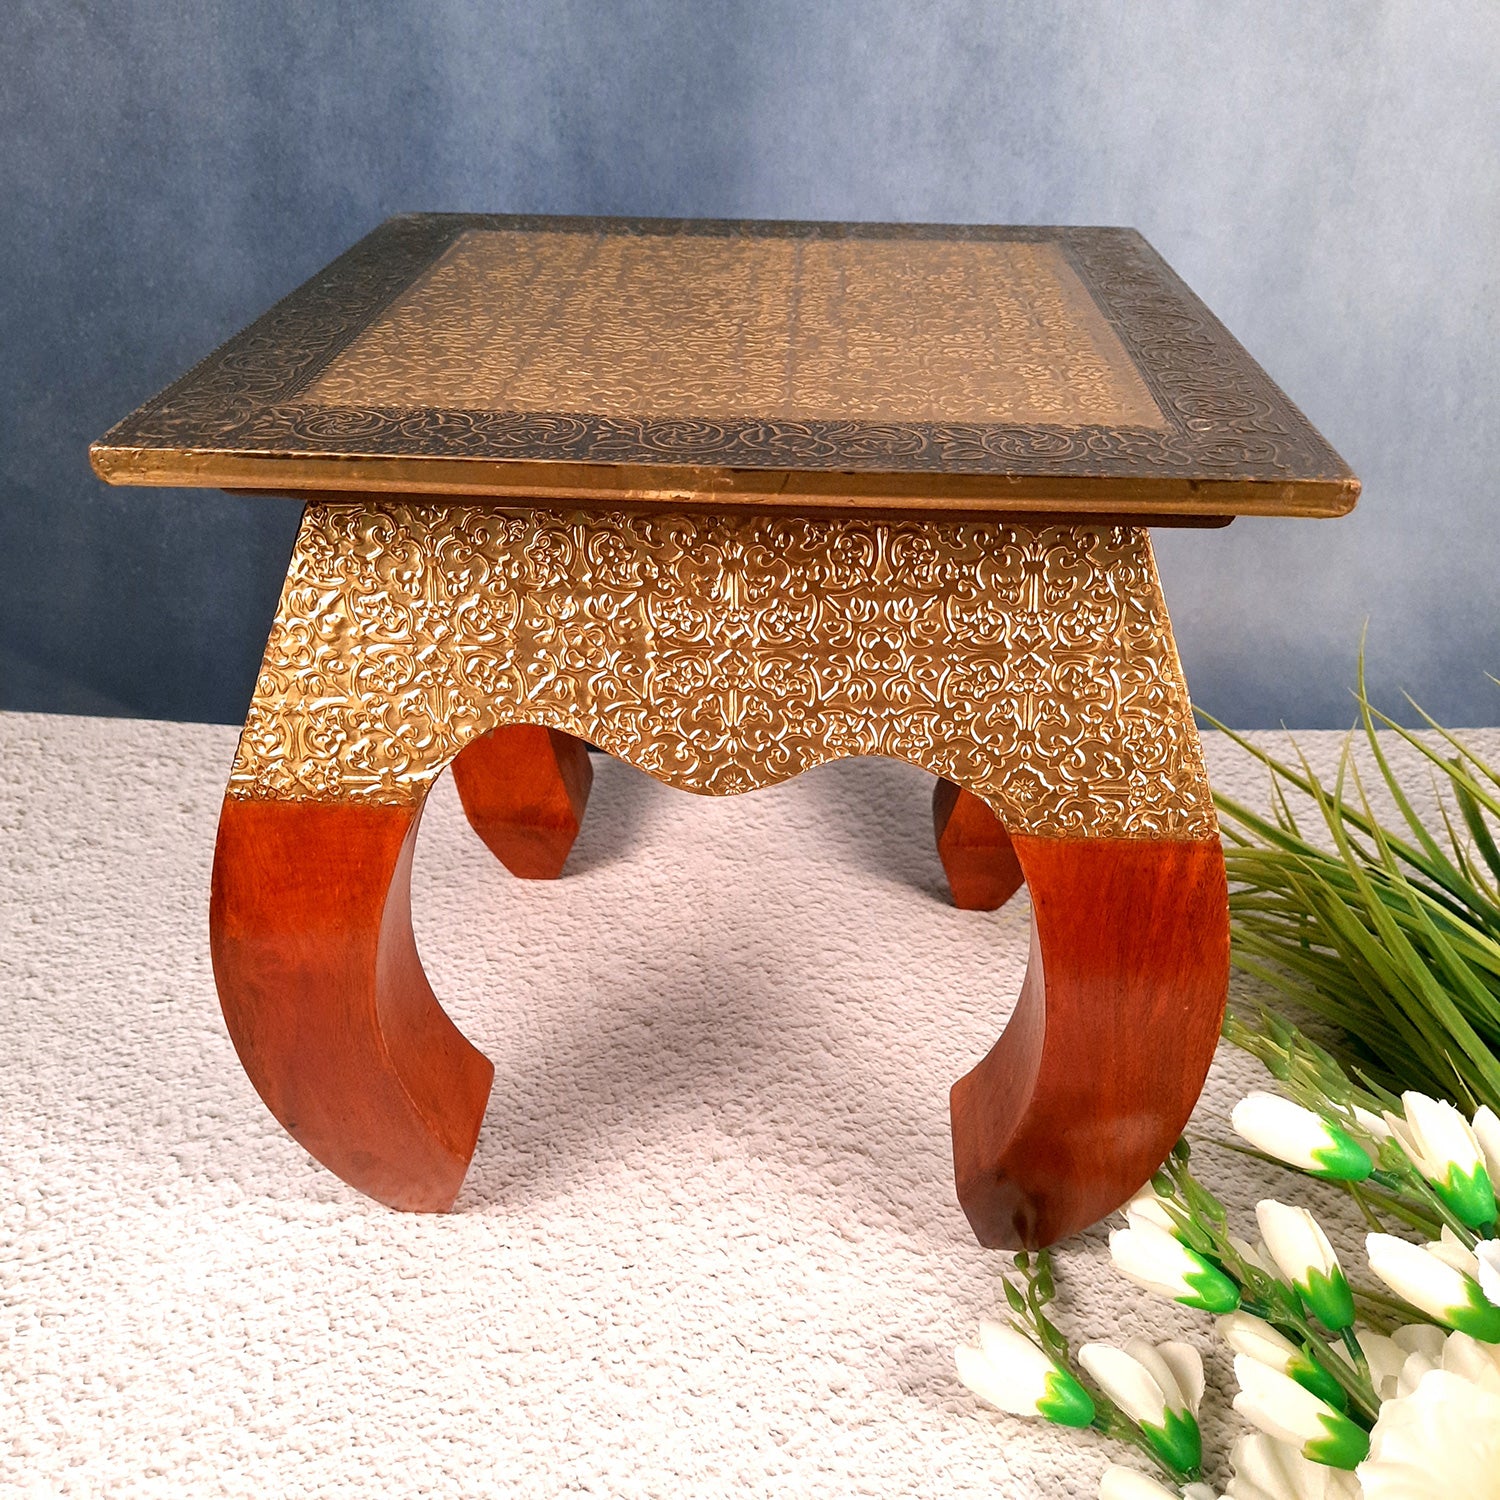 Side Table | Wood & Brass End Tables Cum Stool - for Keeping Lamp, Vases & Plants | Small Stools - for Sitting, Bedside, Home Decor, Corners, Sofa Side Stool, Office & Gifts - 12 Inch - apkamart